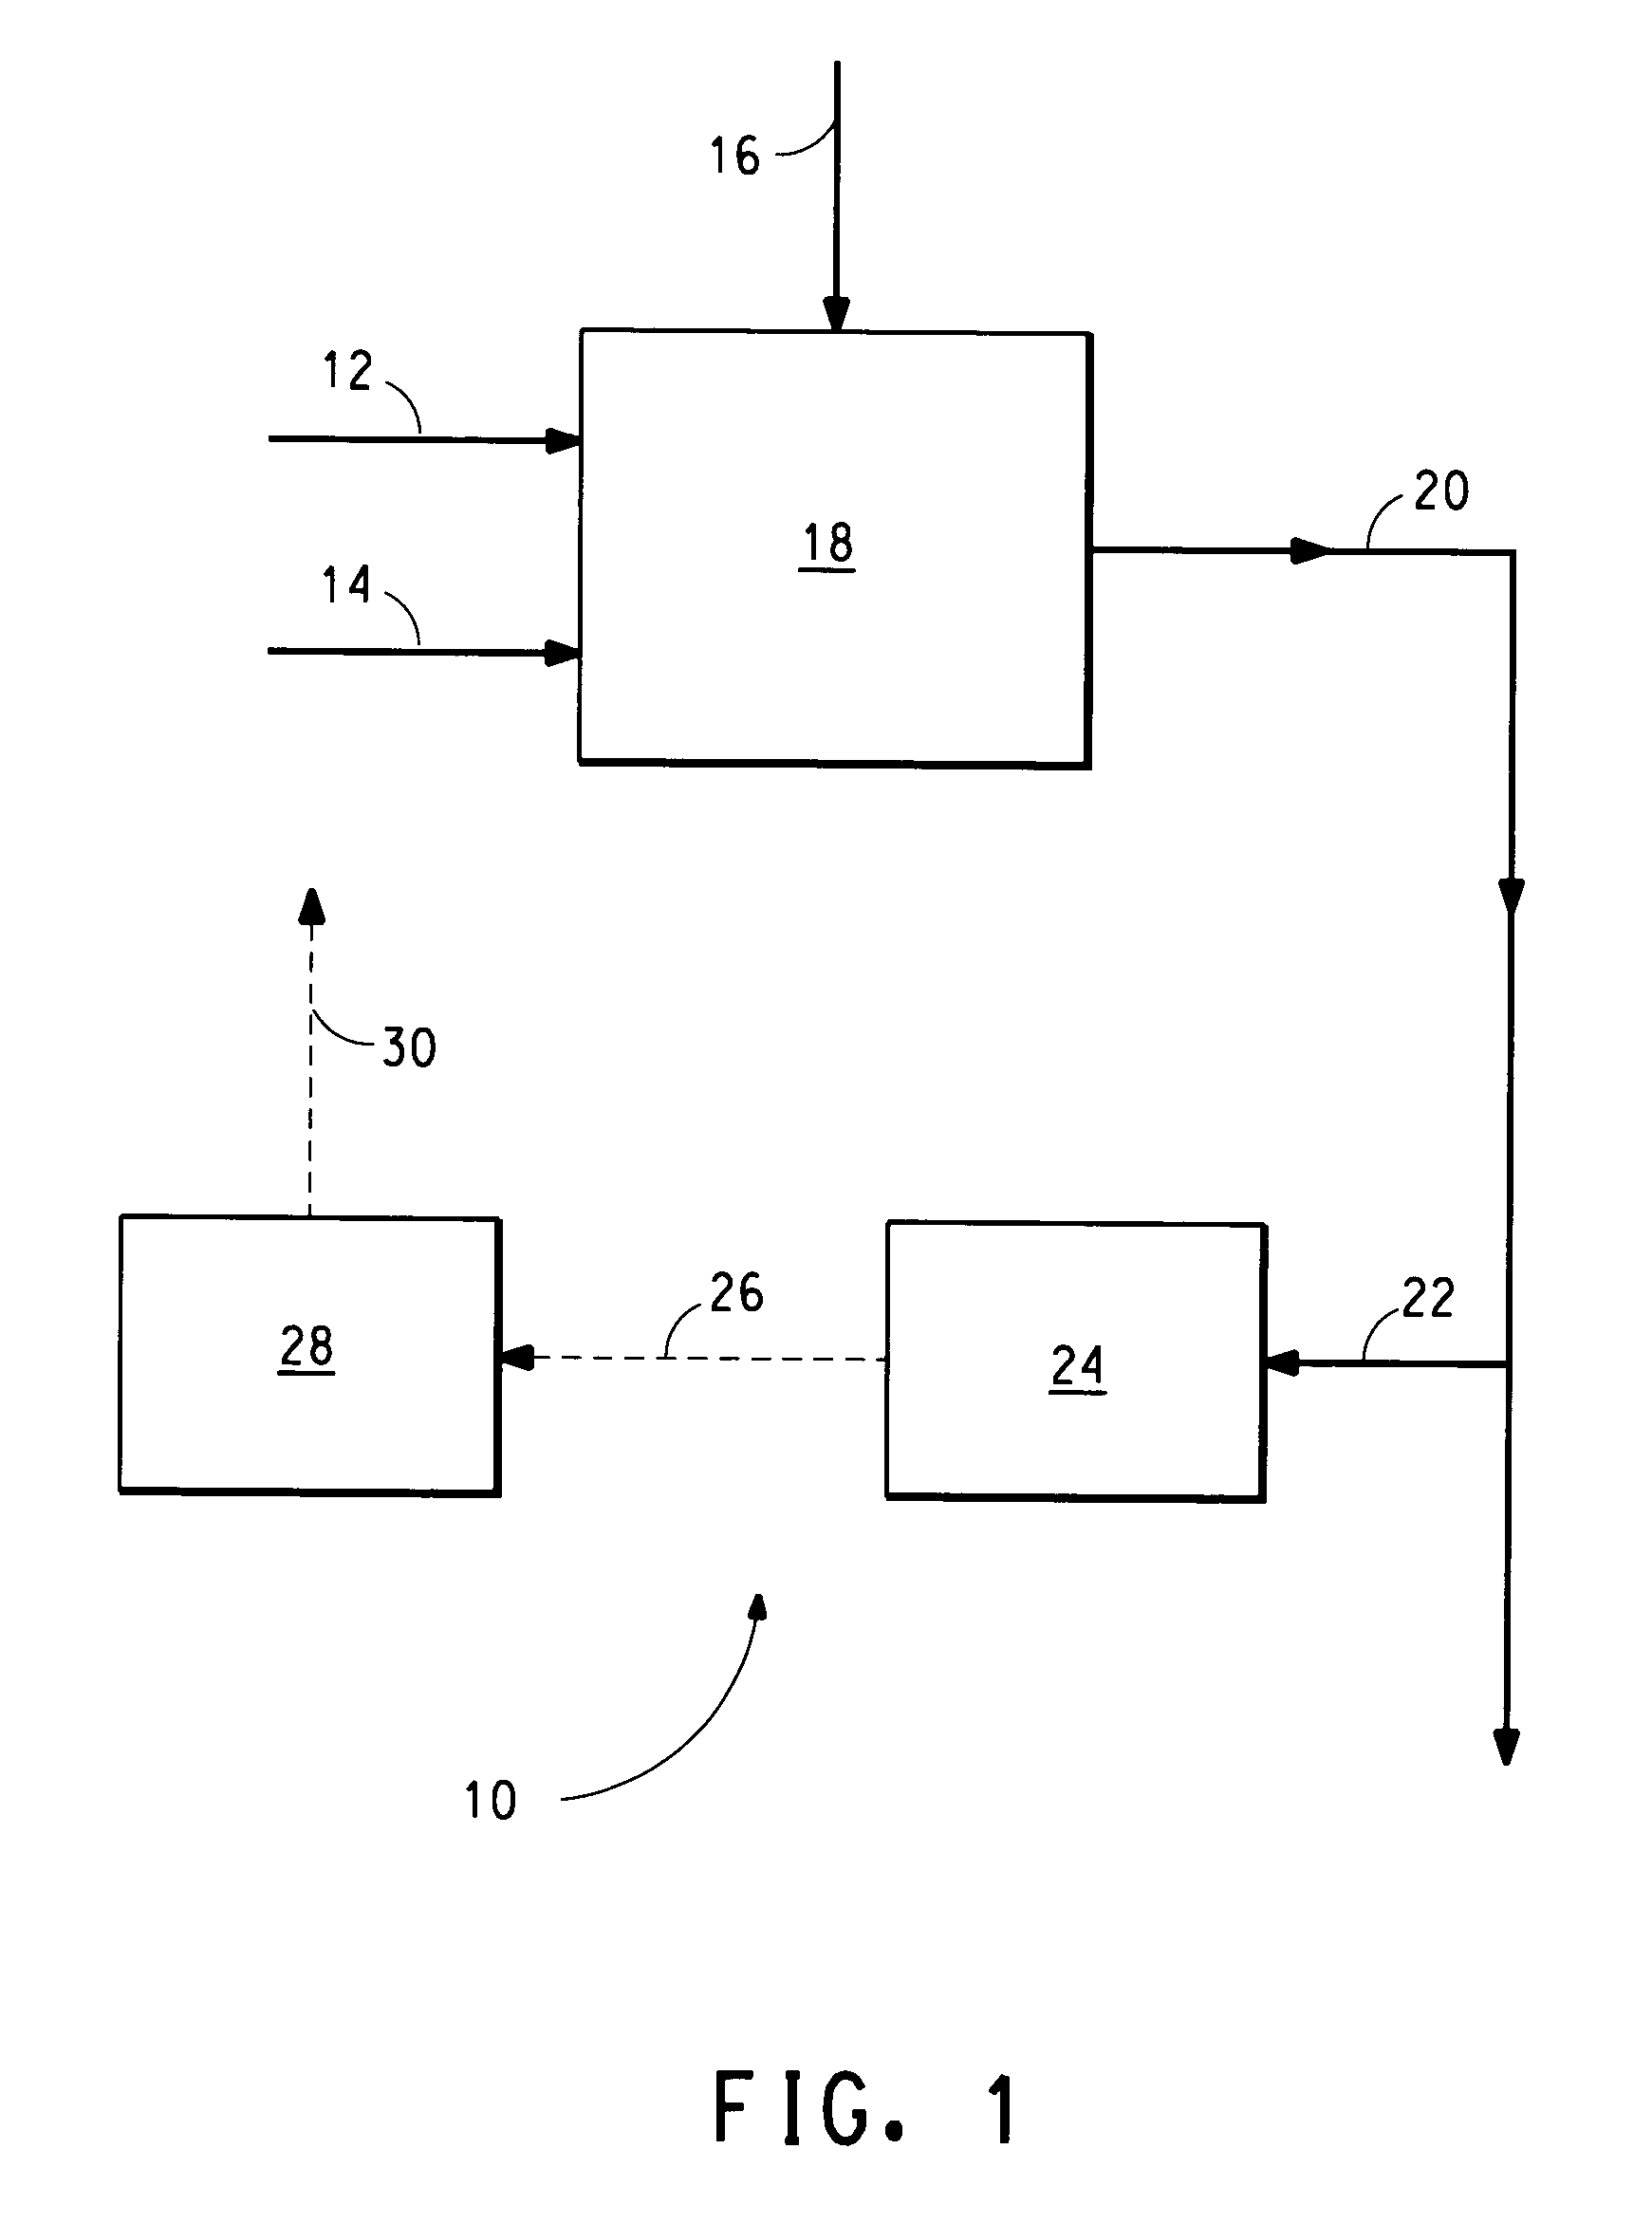 Method of making hydrocyanic acid using a mass spectrometer control system